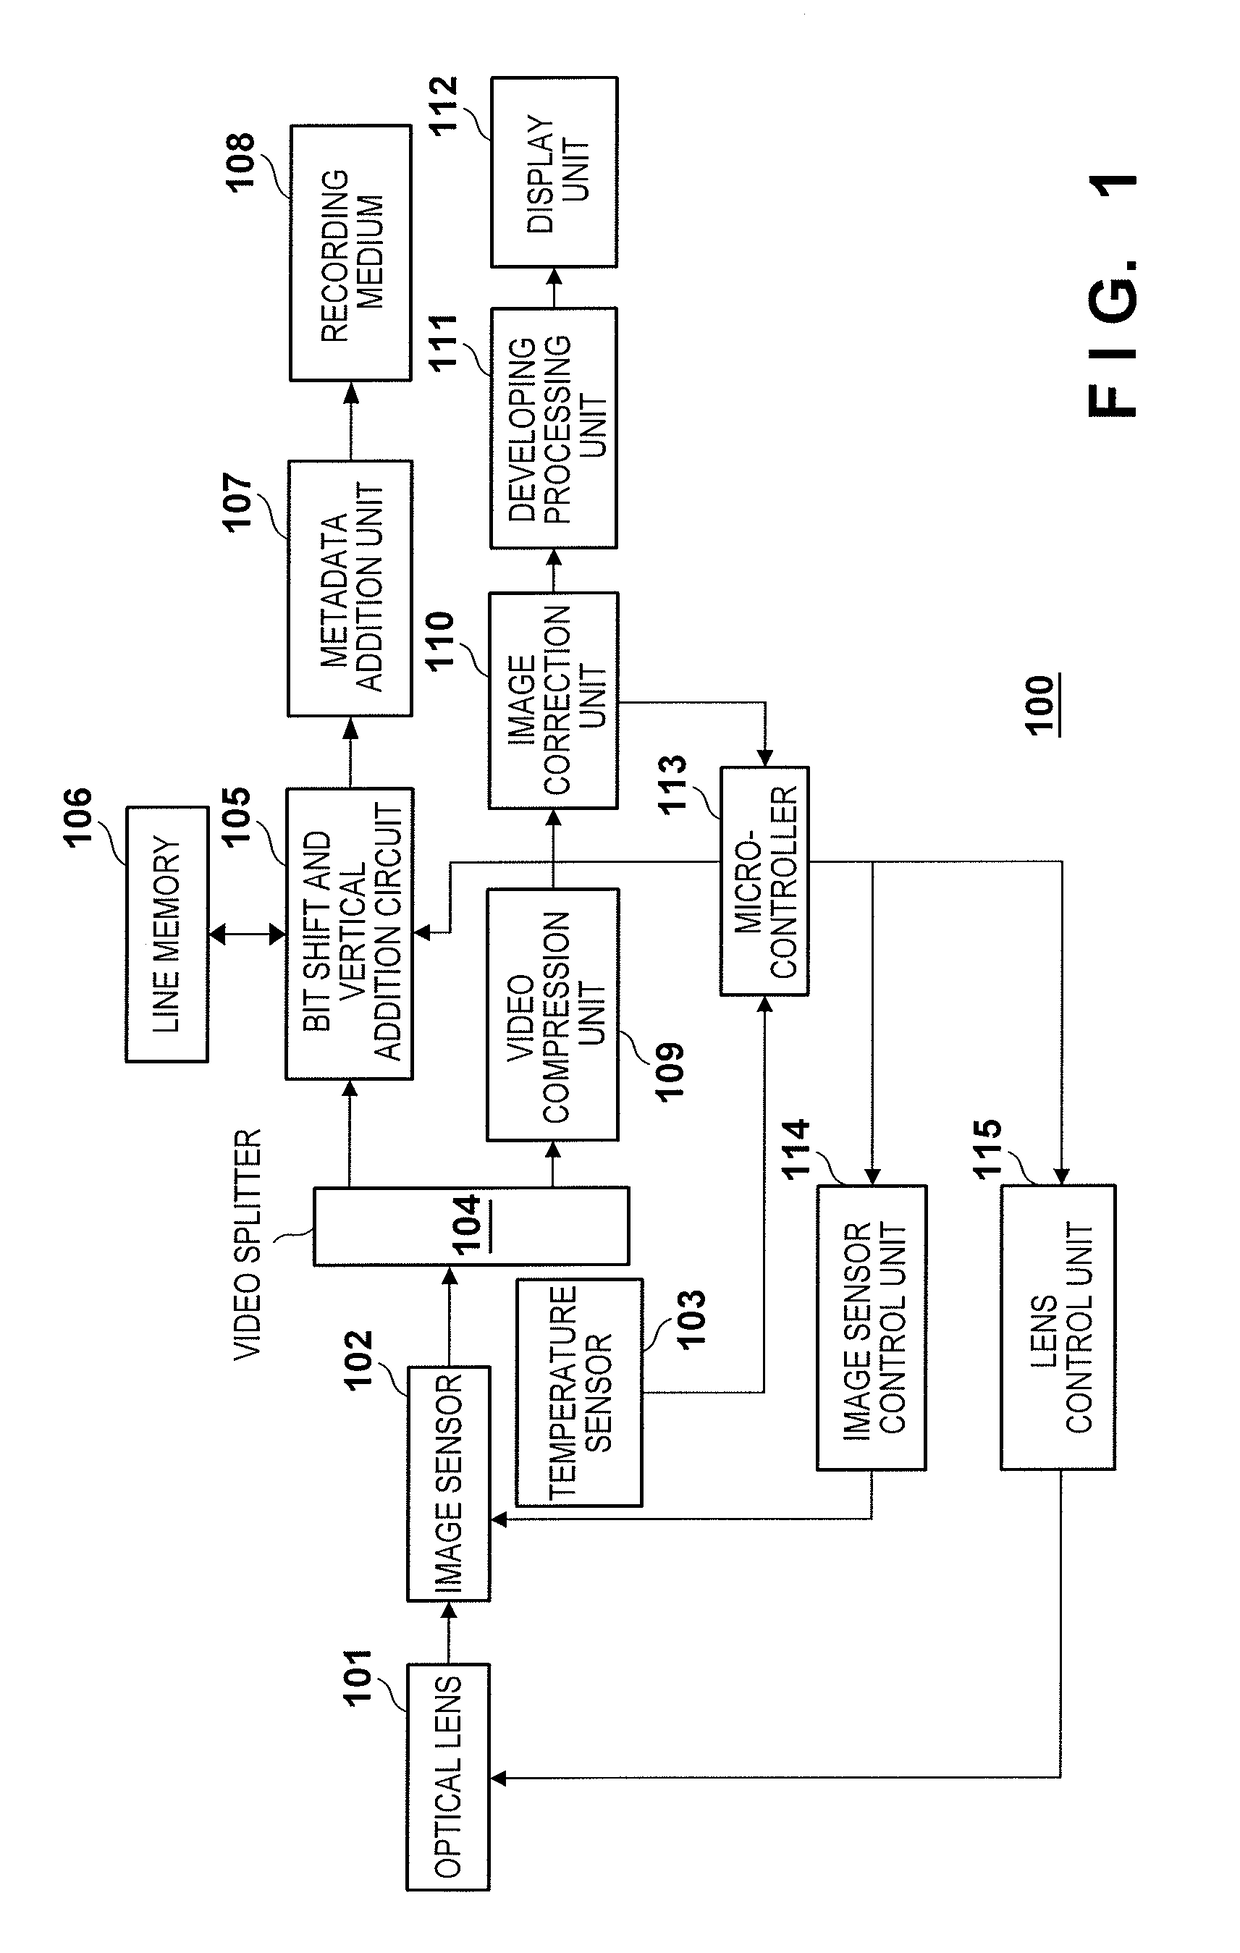 Image capturing apparatus, image capturing system, and control method for the image capturing apparatus